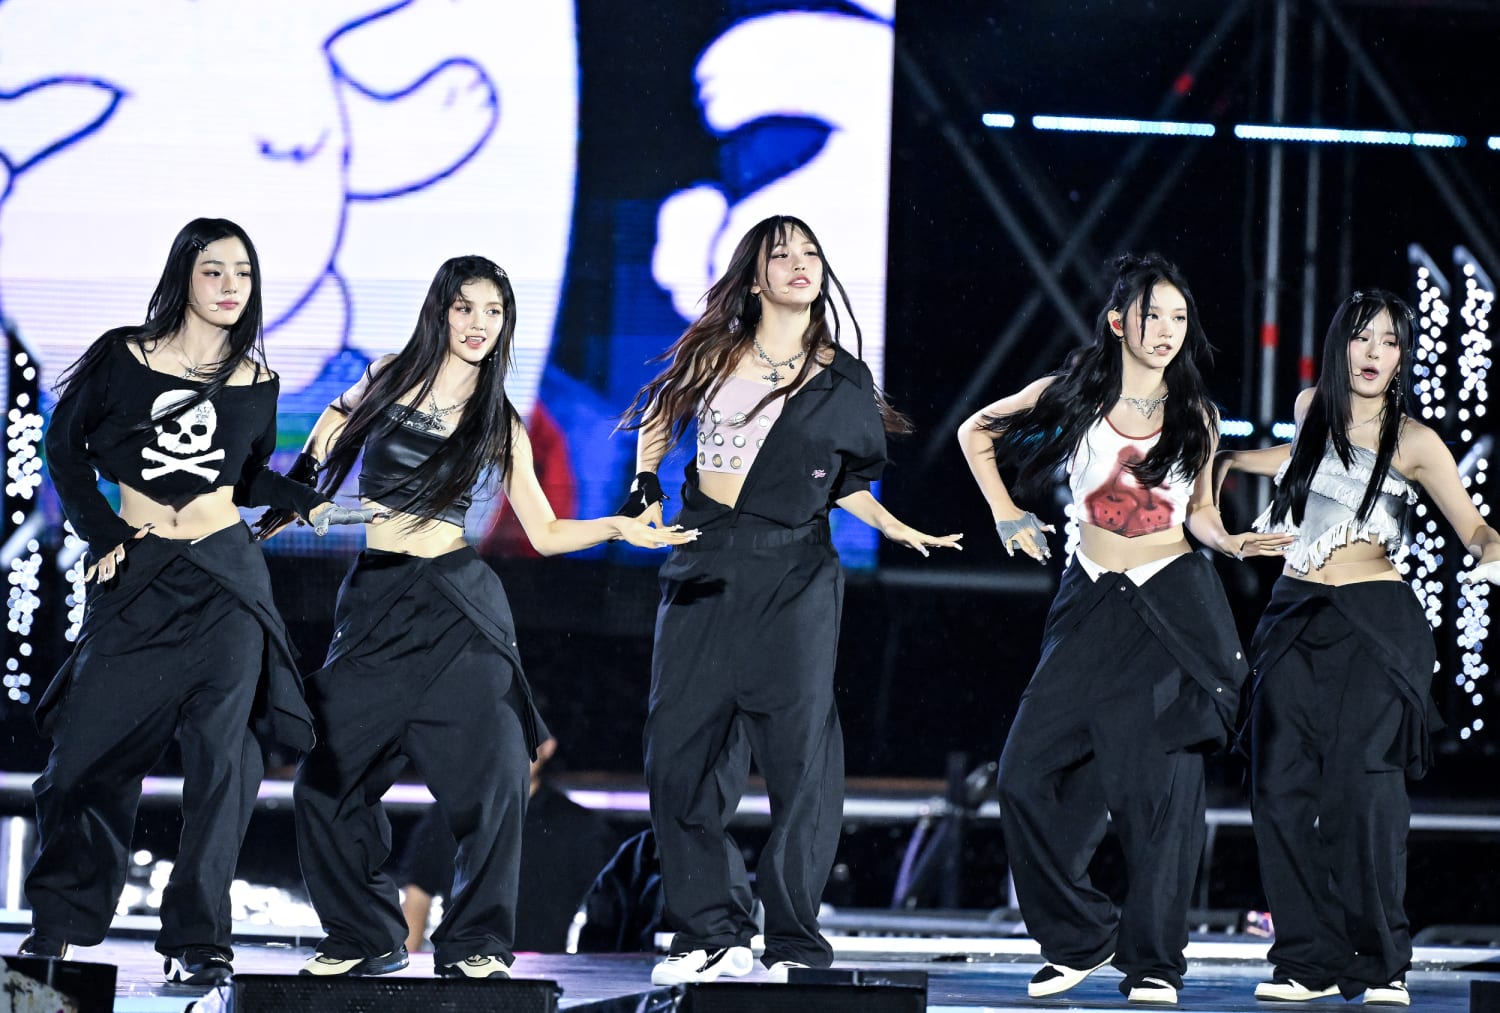 Watch NewJeans perform at Worlds 2023 opening ceremony